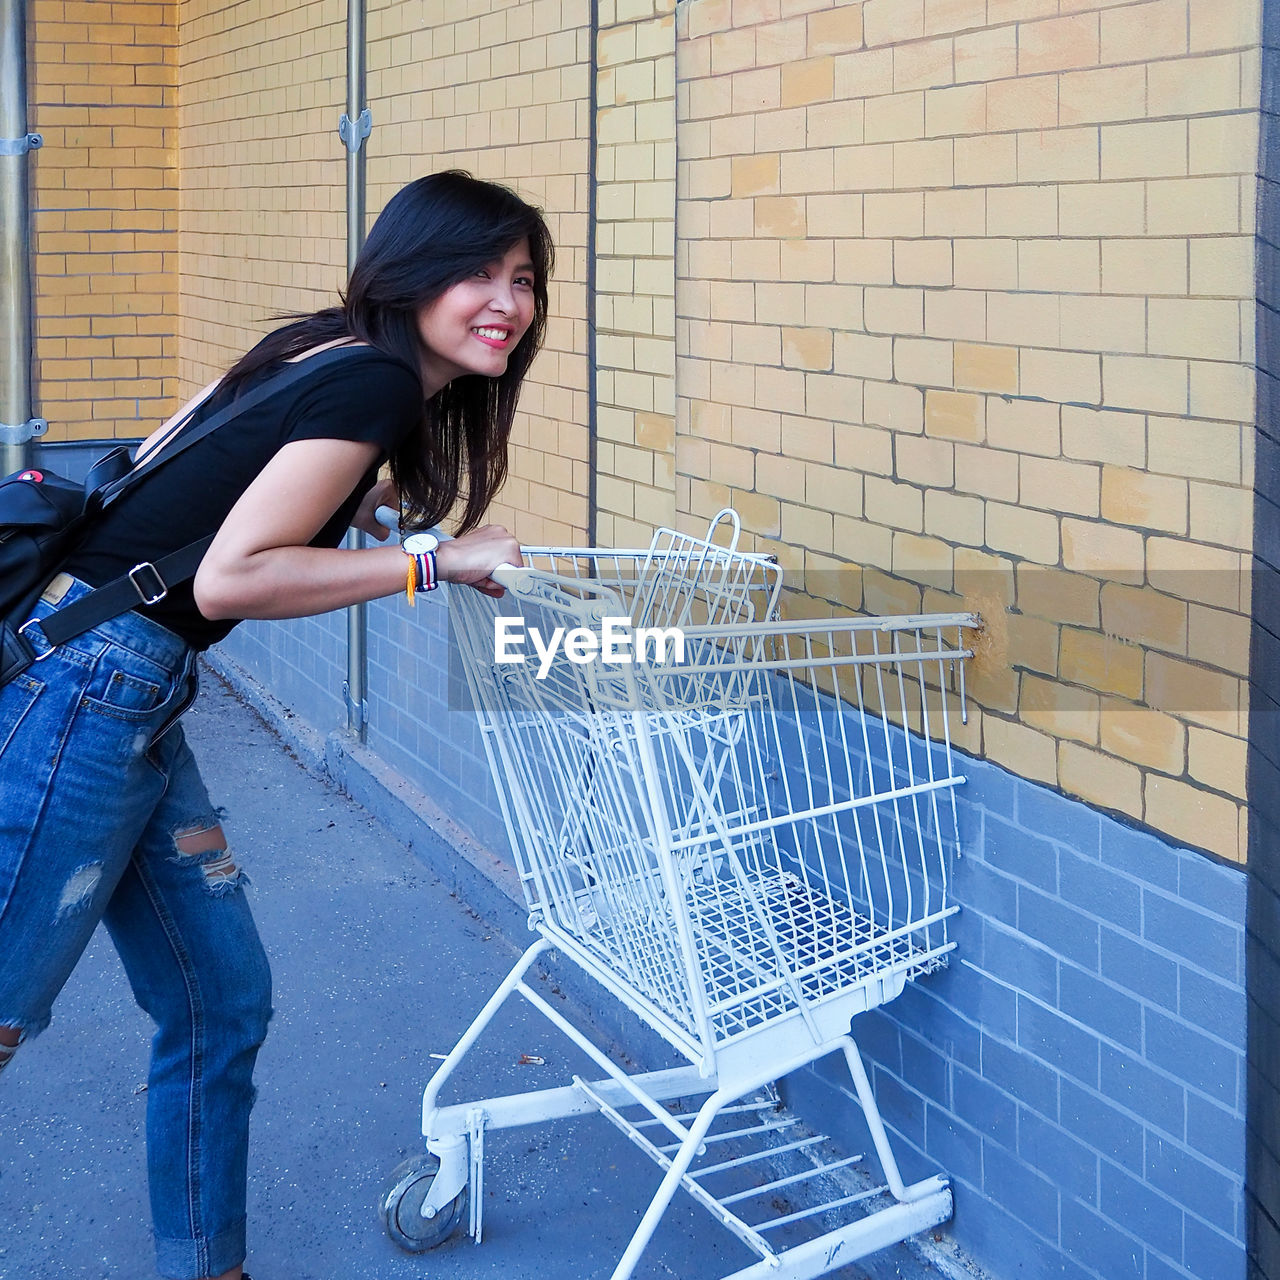 Side view portrait of smiling woman holding shopping cart by brick wall